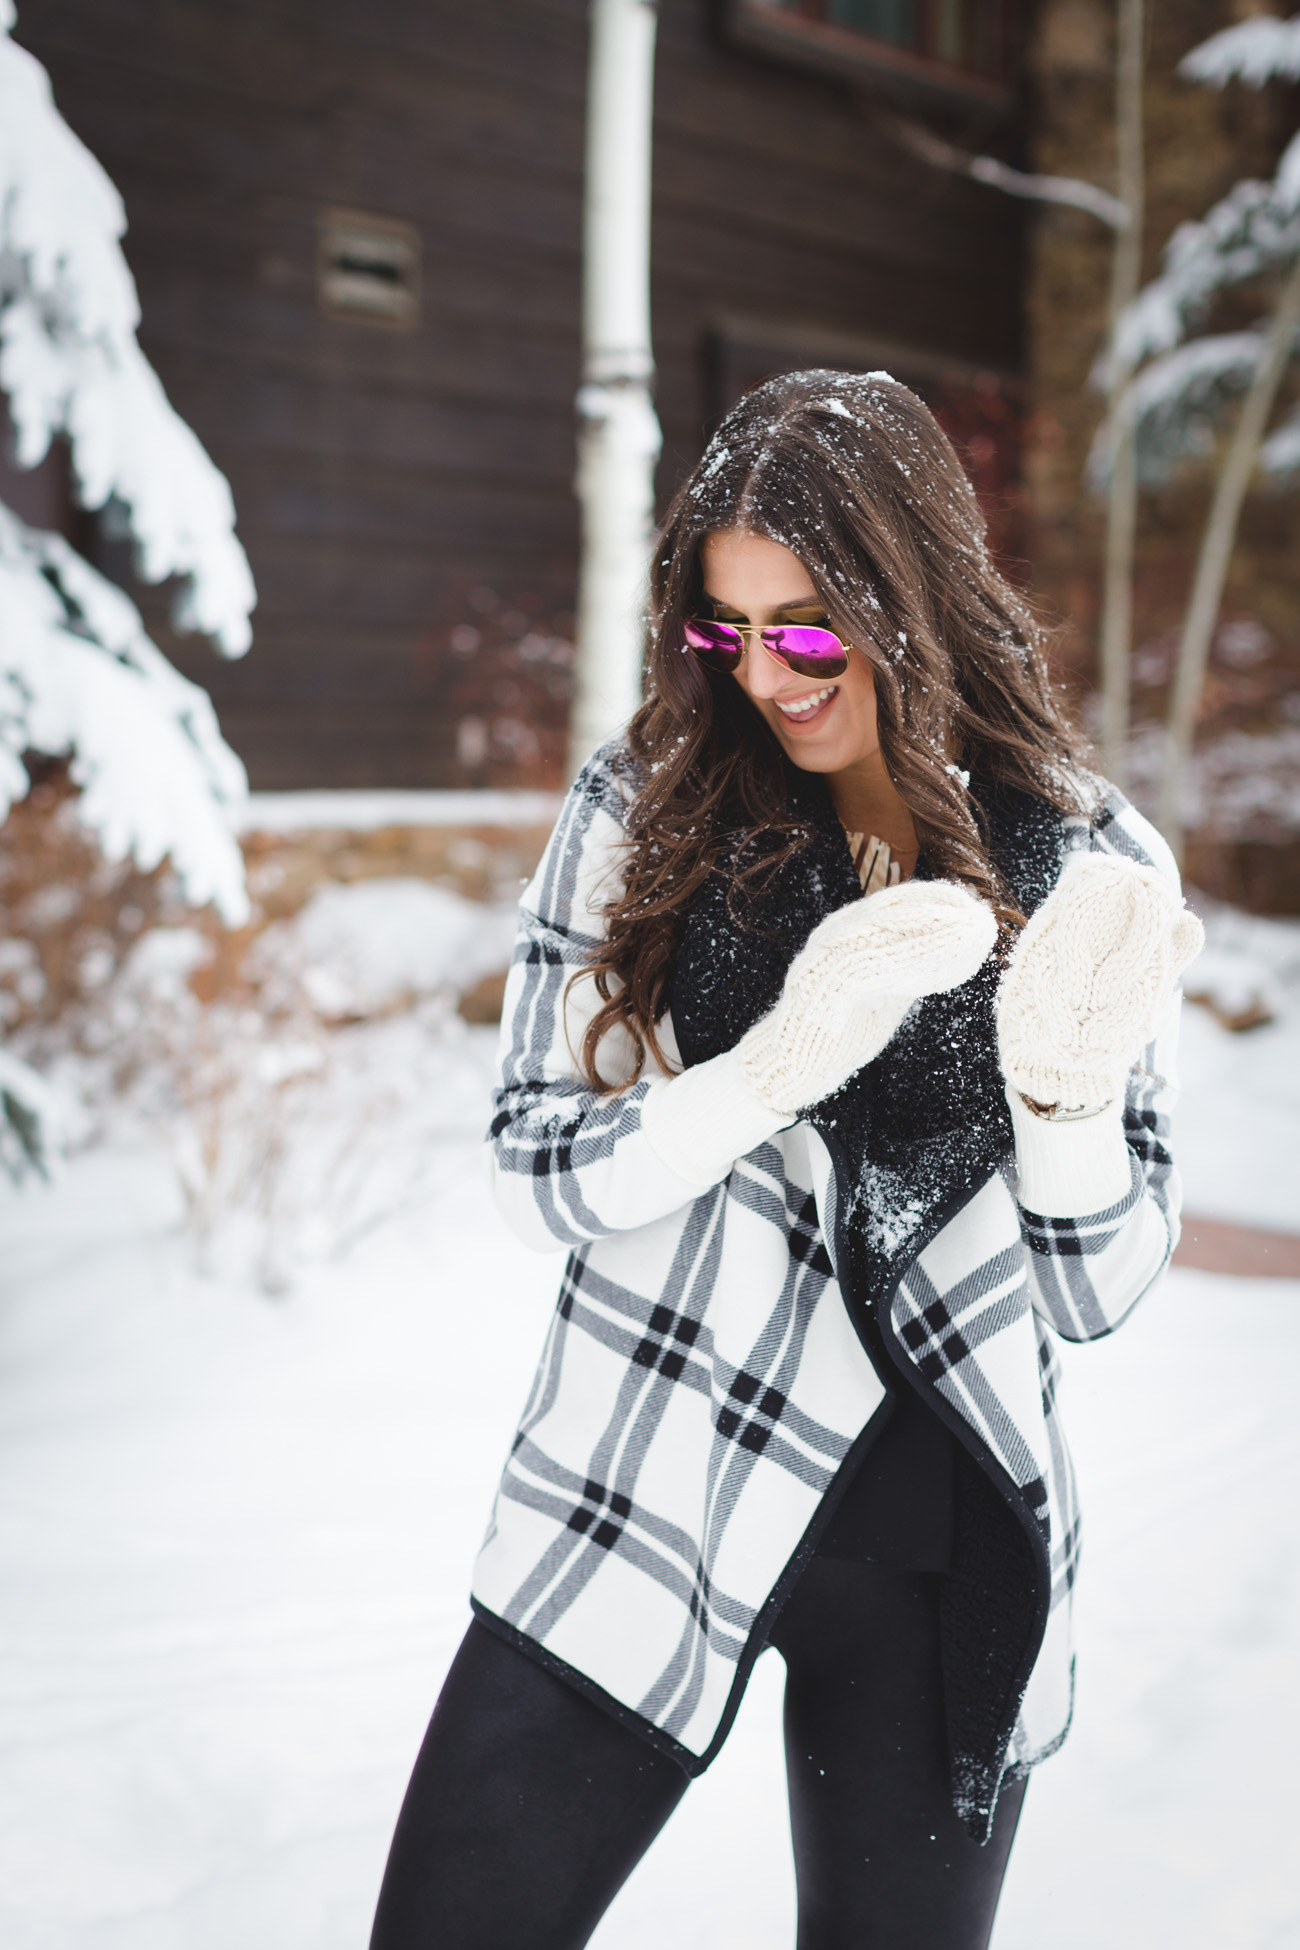 plaid fleece cardigan, abercrombie cardigan, winter style, winter fashion, vail style, colorado style, outfit for vail, outfit for snow, snow outfit, mirror aviators, sperry duckboots, bean boots, sperry duck boots // grace wainwright a southern drawl